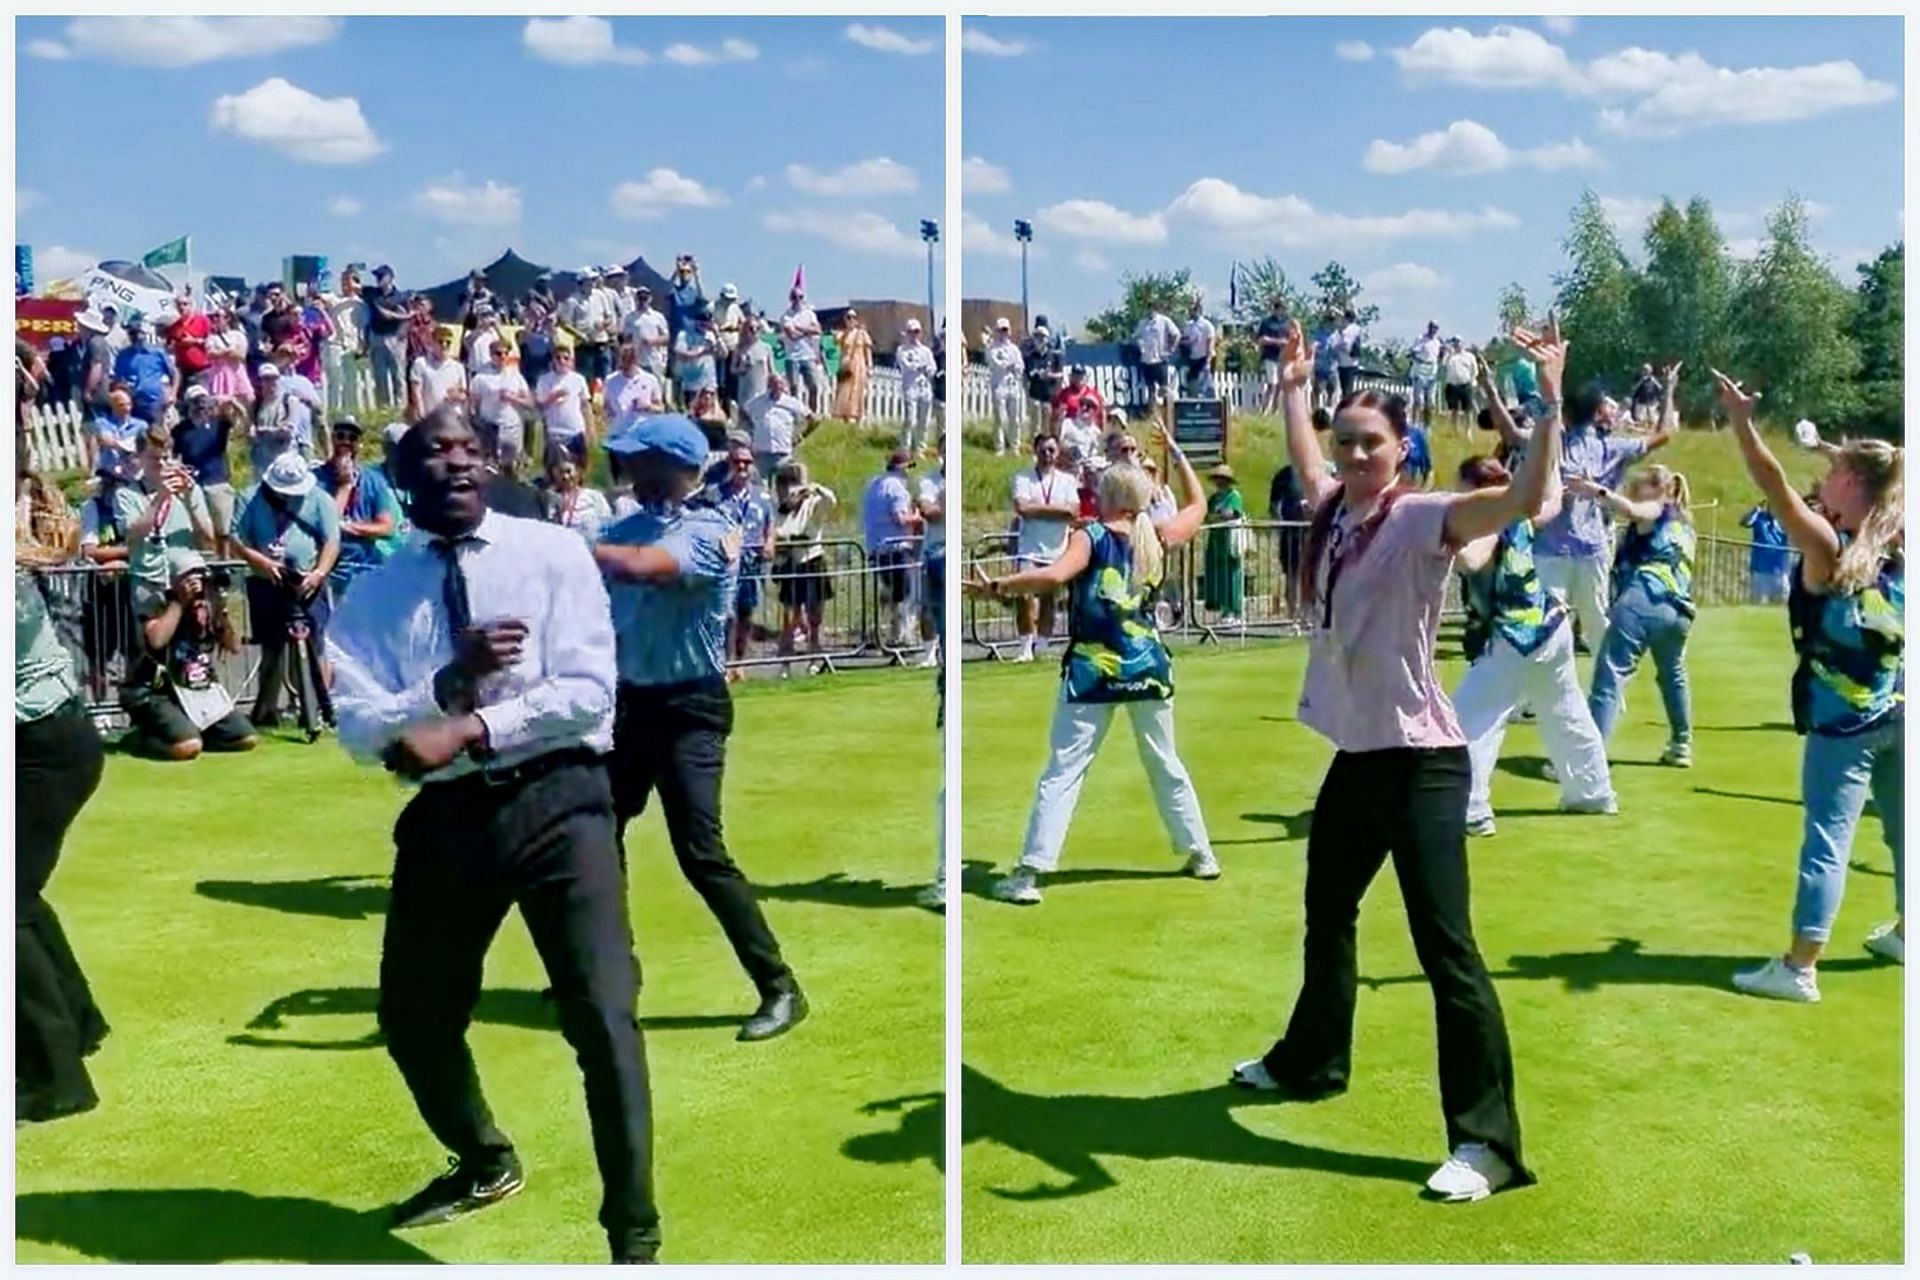 A flash mob broke out during the LIV Golf London(Image viaTwitter.com/thegolfeditor)